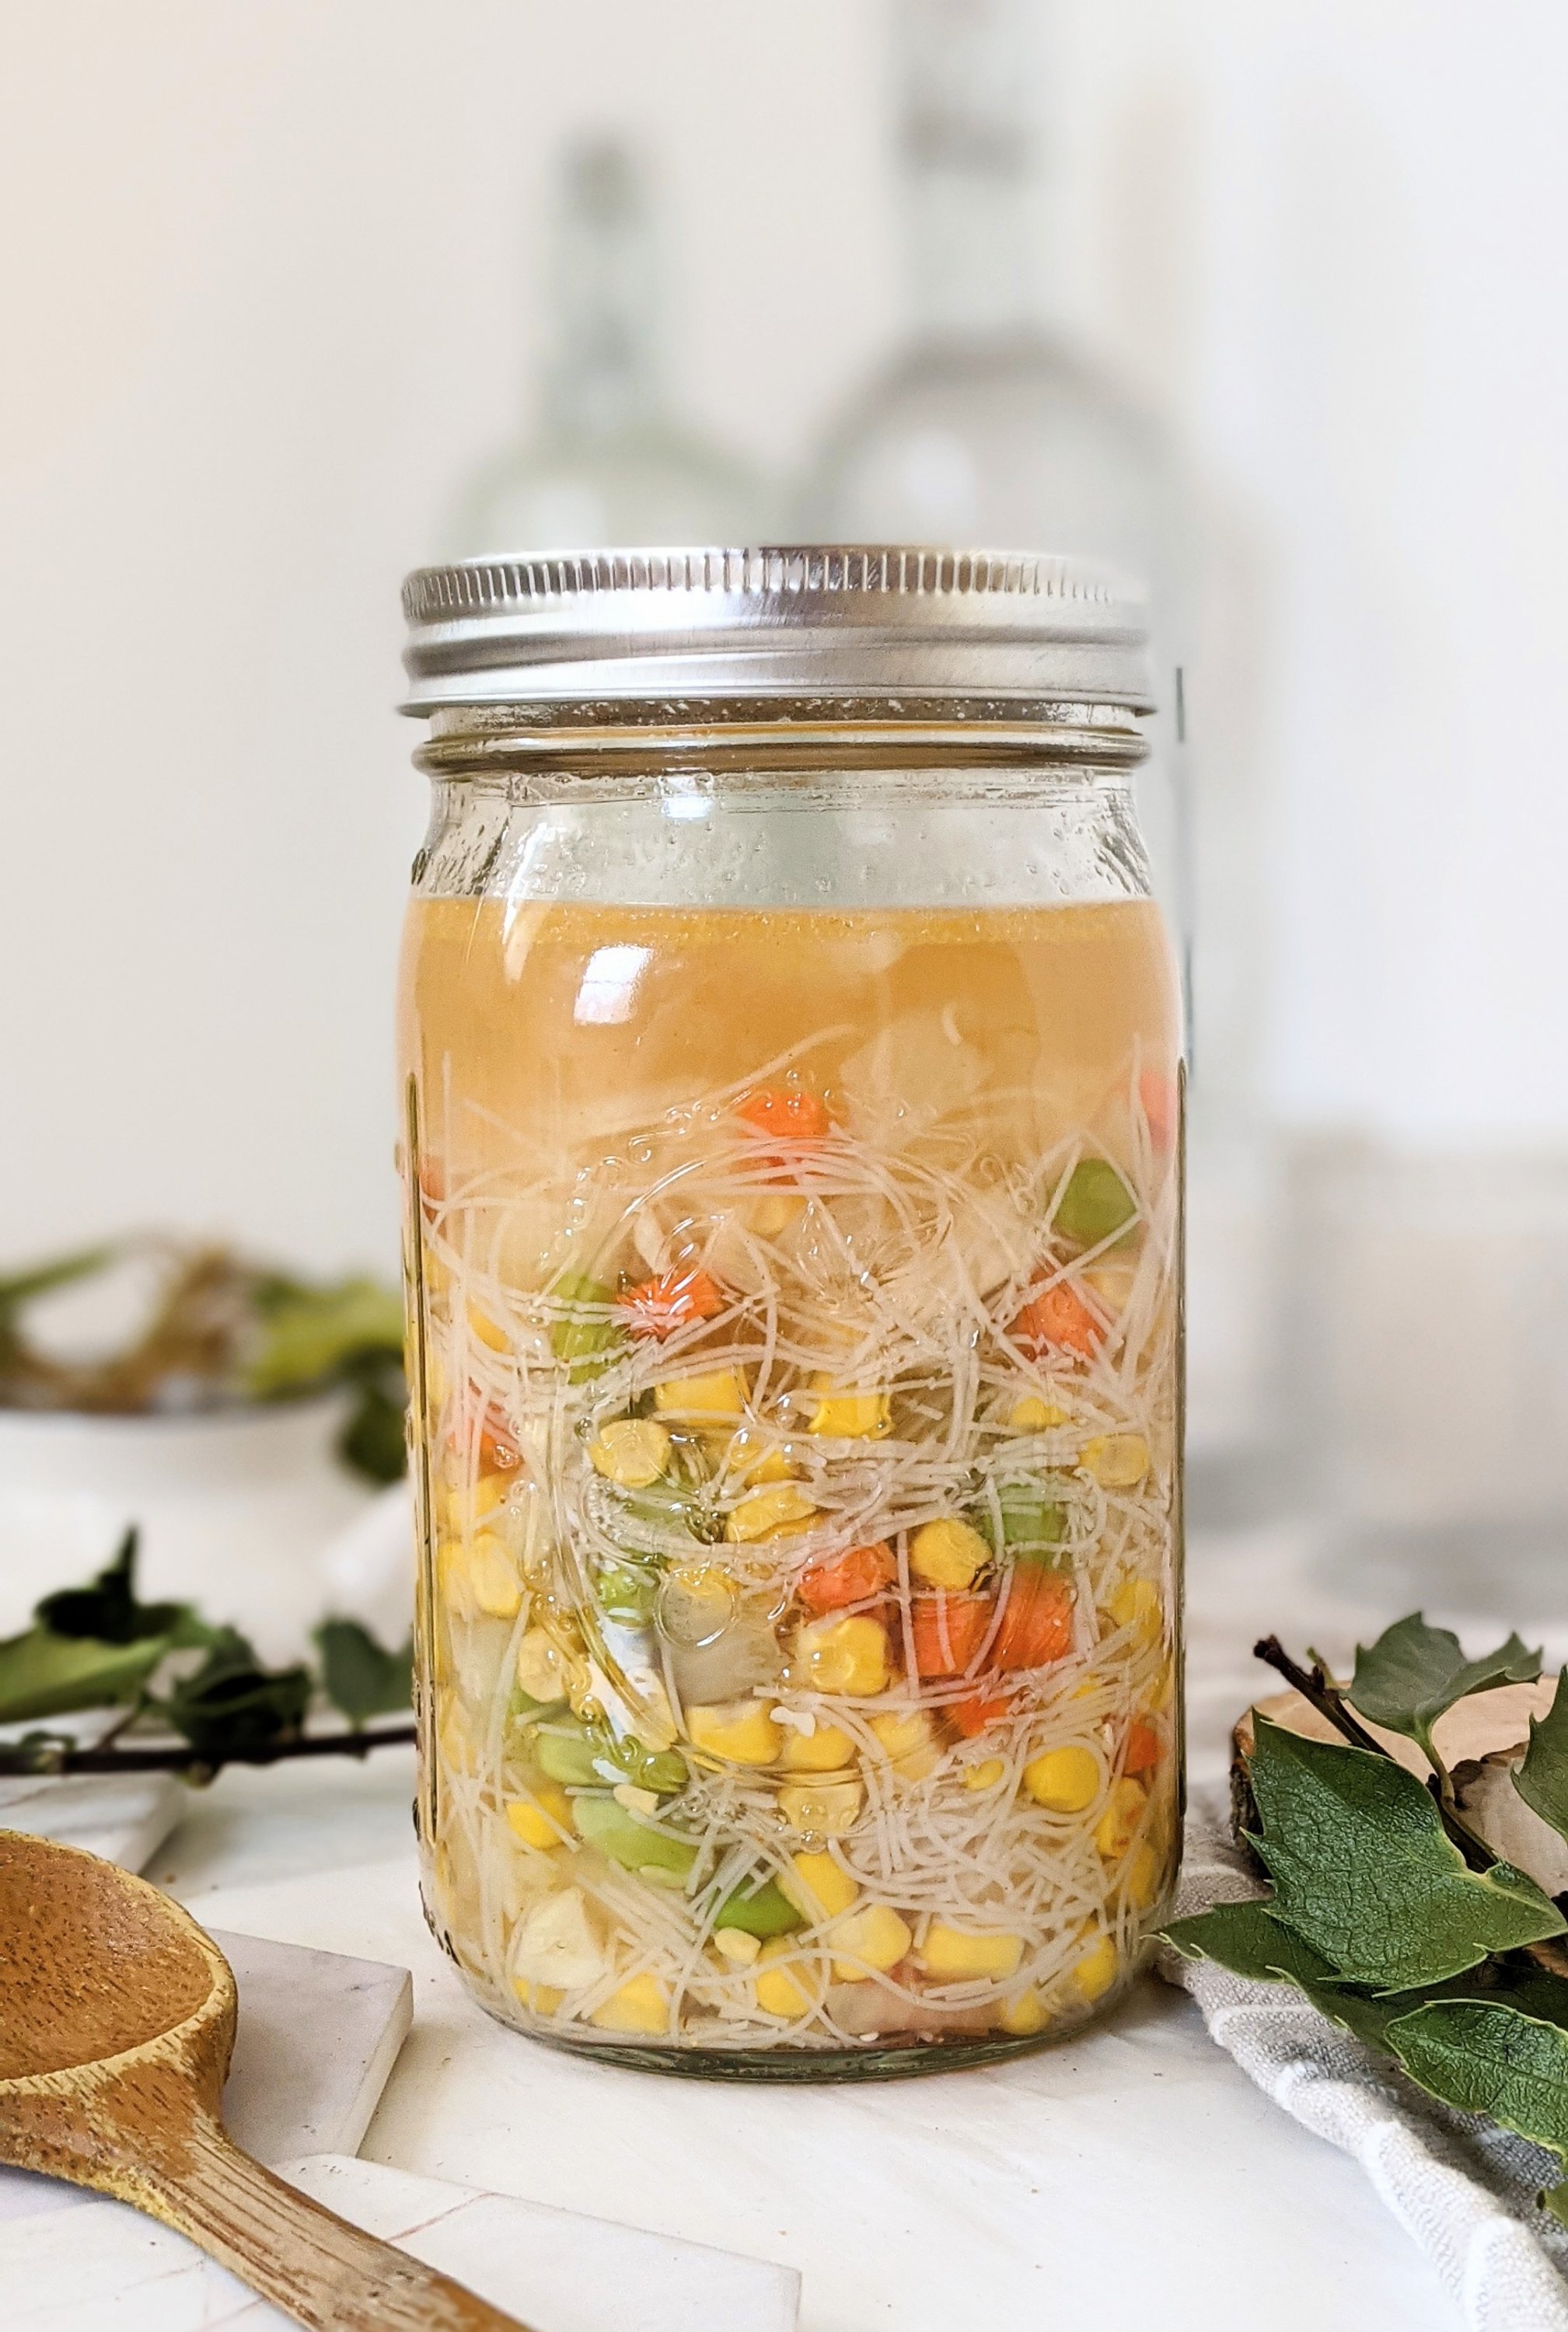 just add water soup recipes mason jar instant ramen noodle soup healthy vegan gluten free easy lunches to meal prep, batch cook, or make ahead for the week veganuary vegetarian meatless